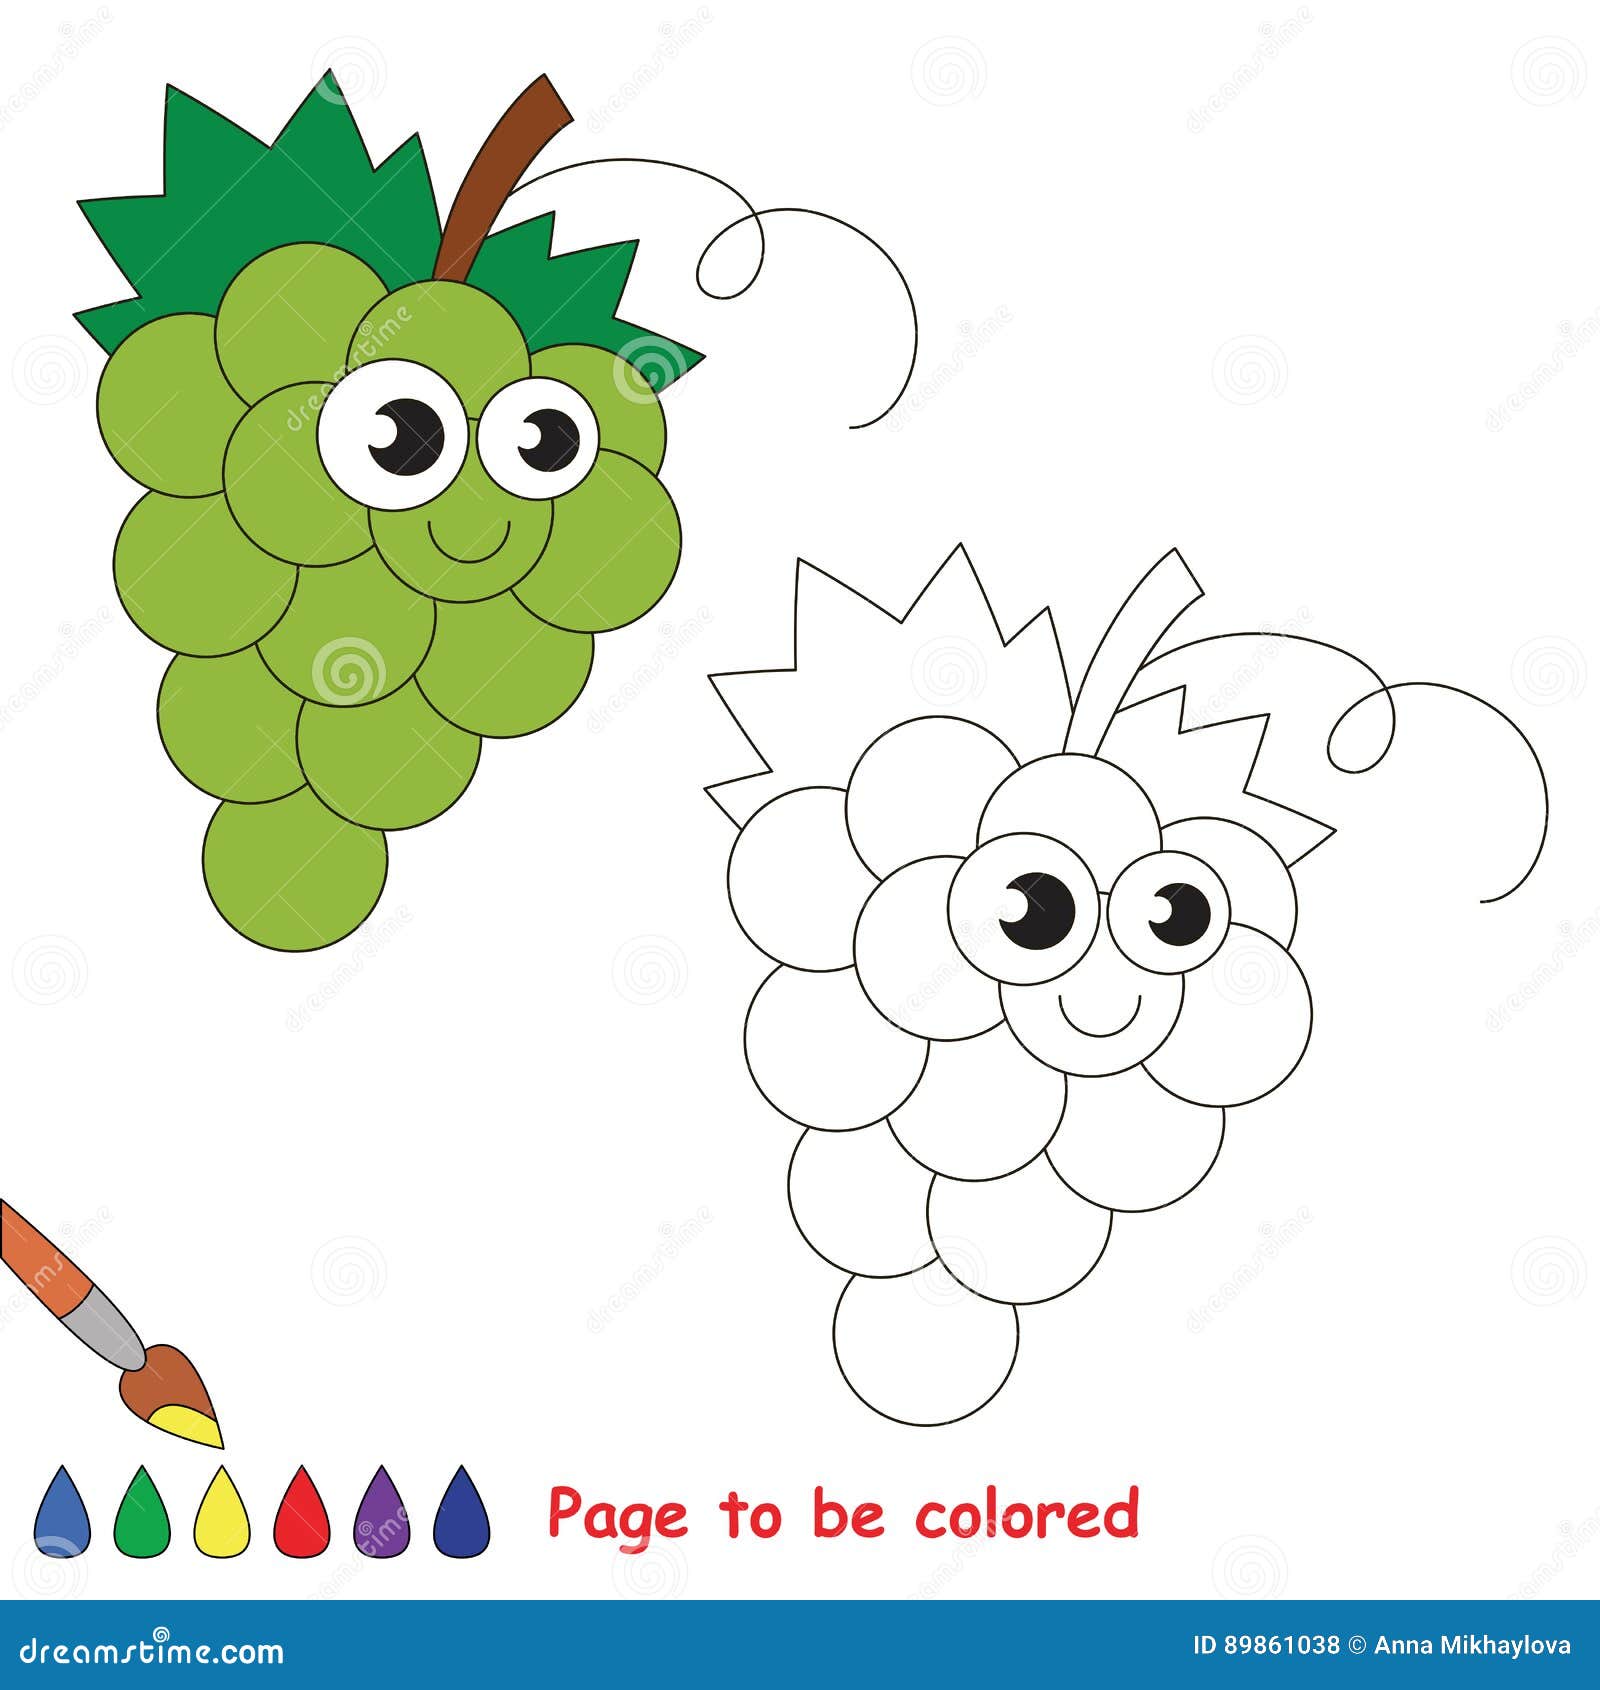 How to Draw Grapes Step by Step Tutorial - EasyDrawingTips